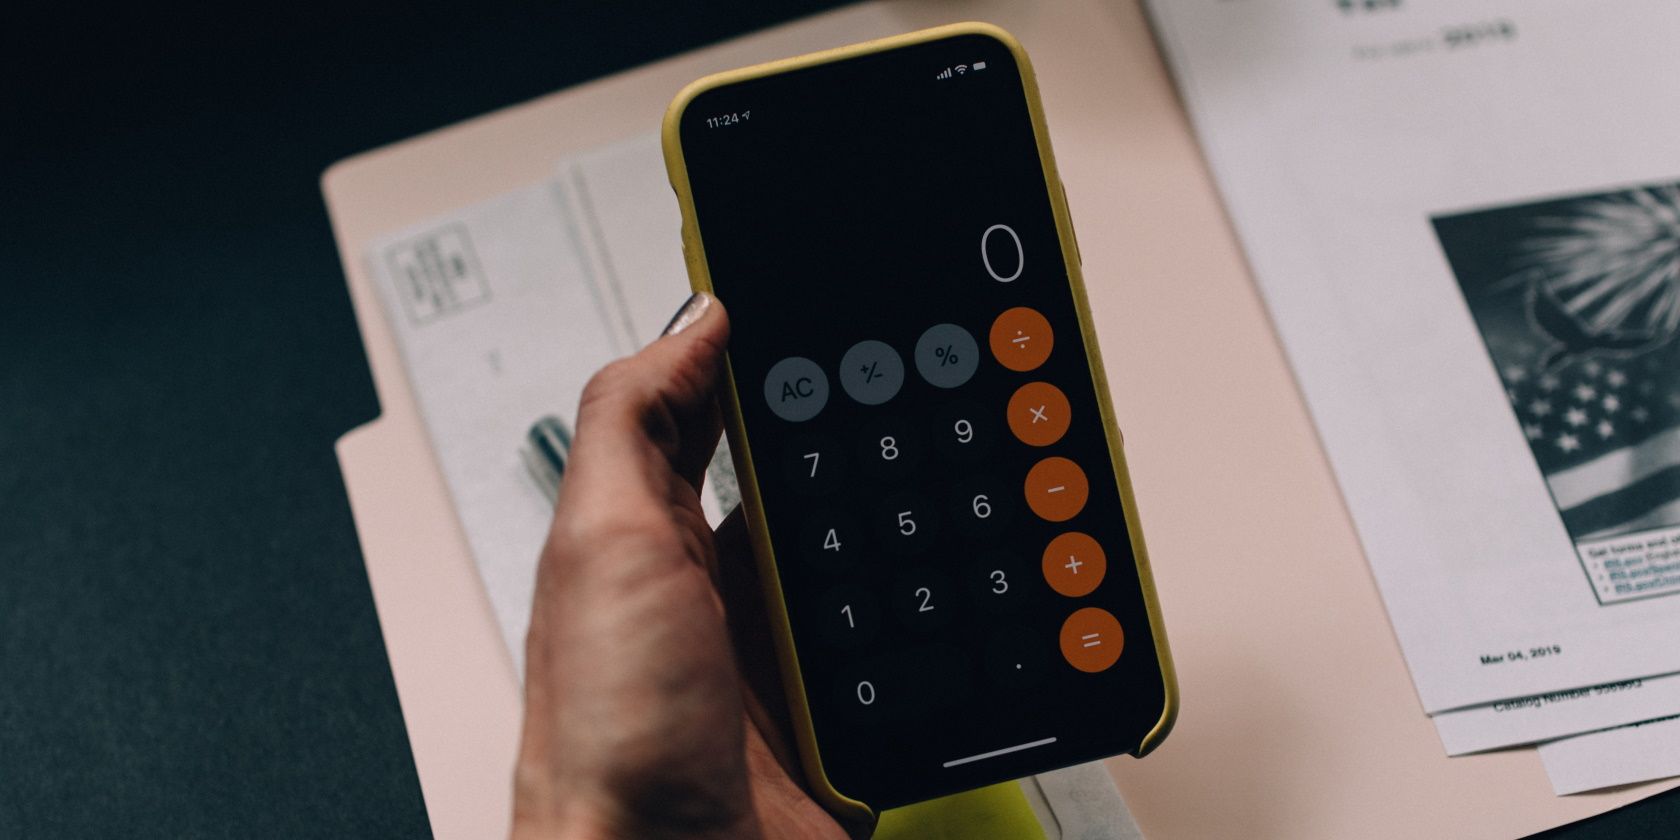 Person holding iPhone with Calculator App opened